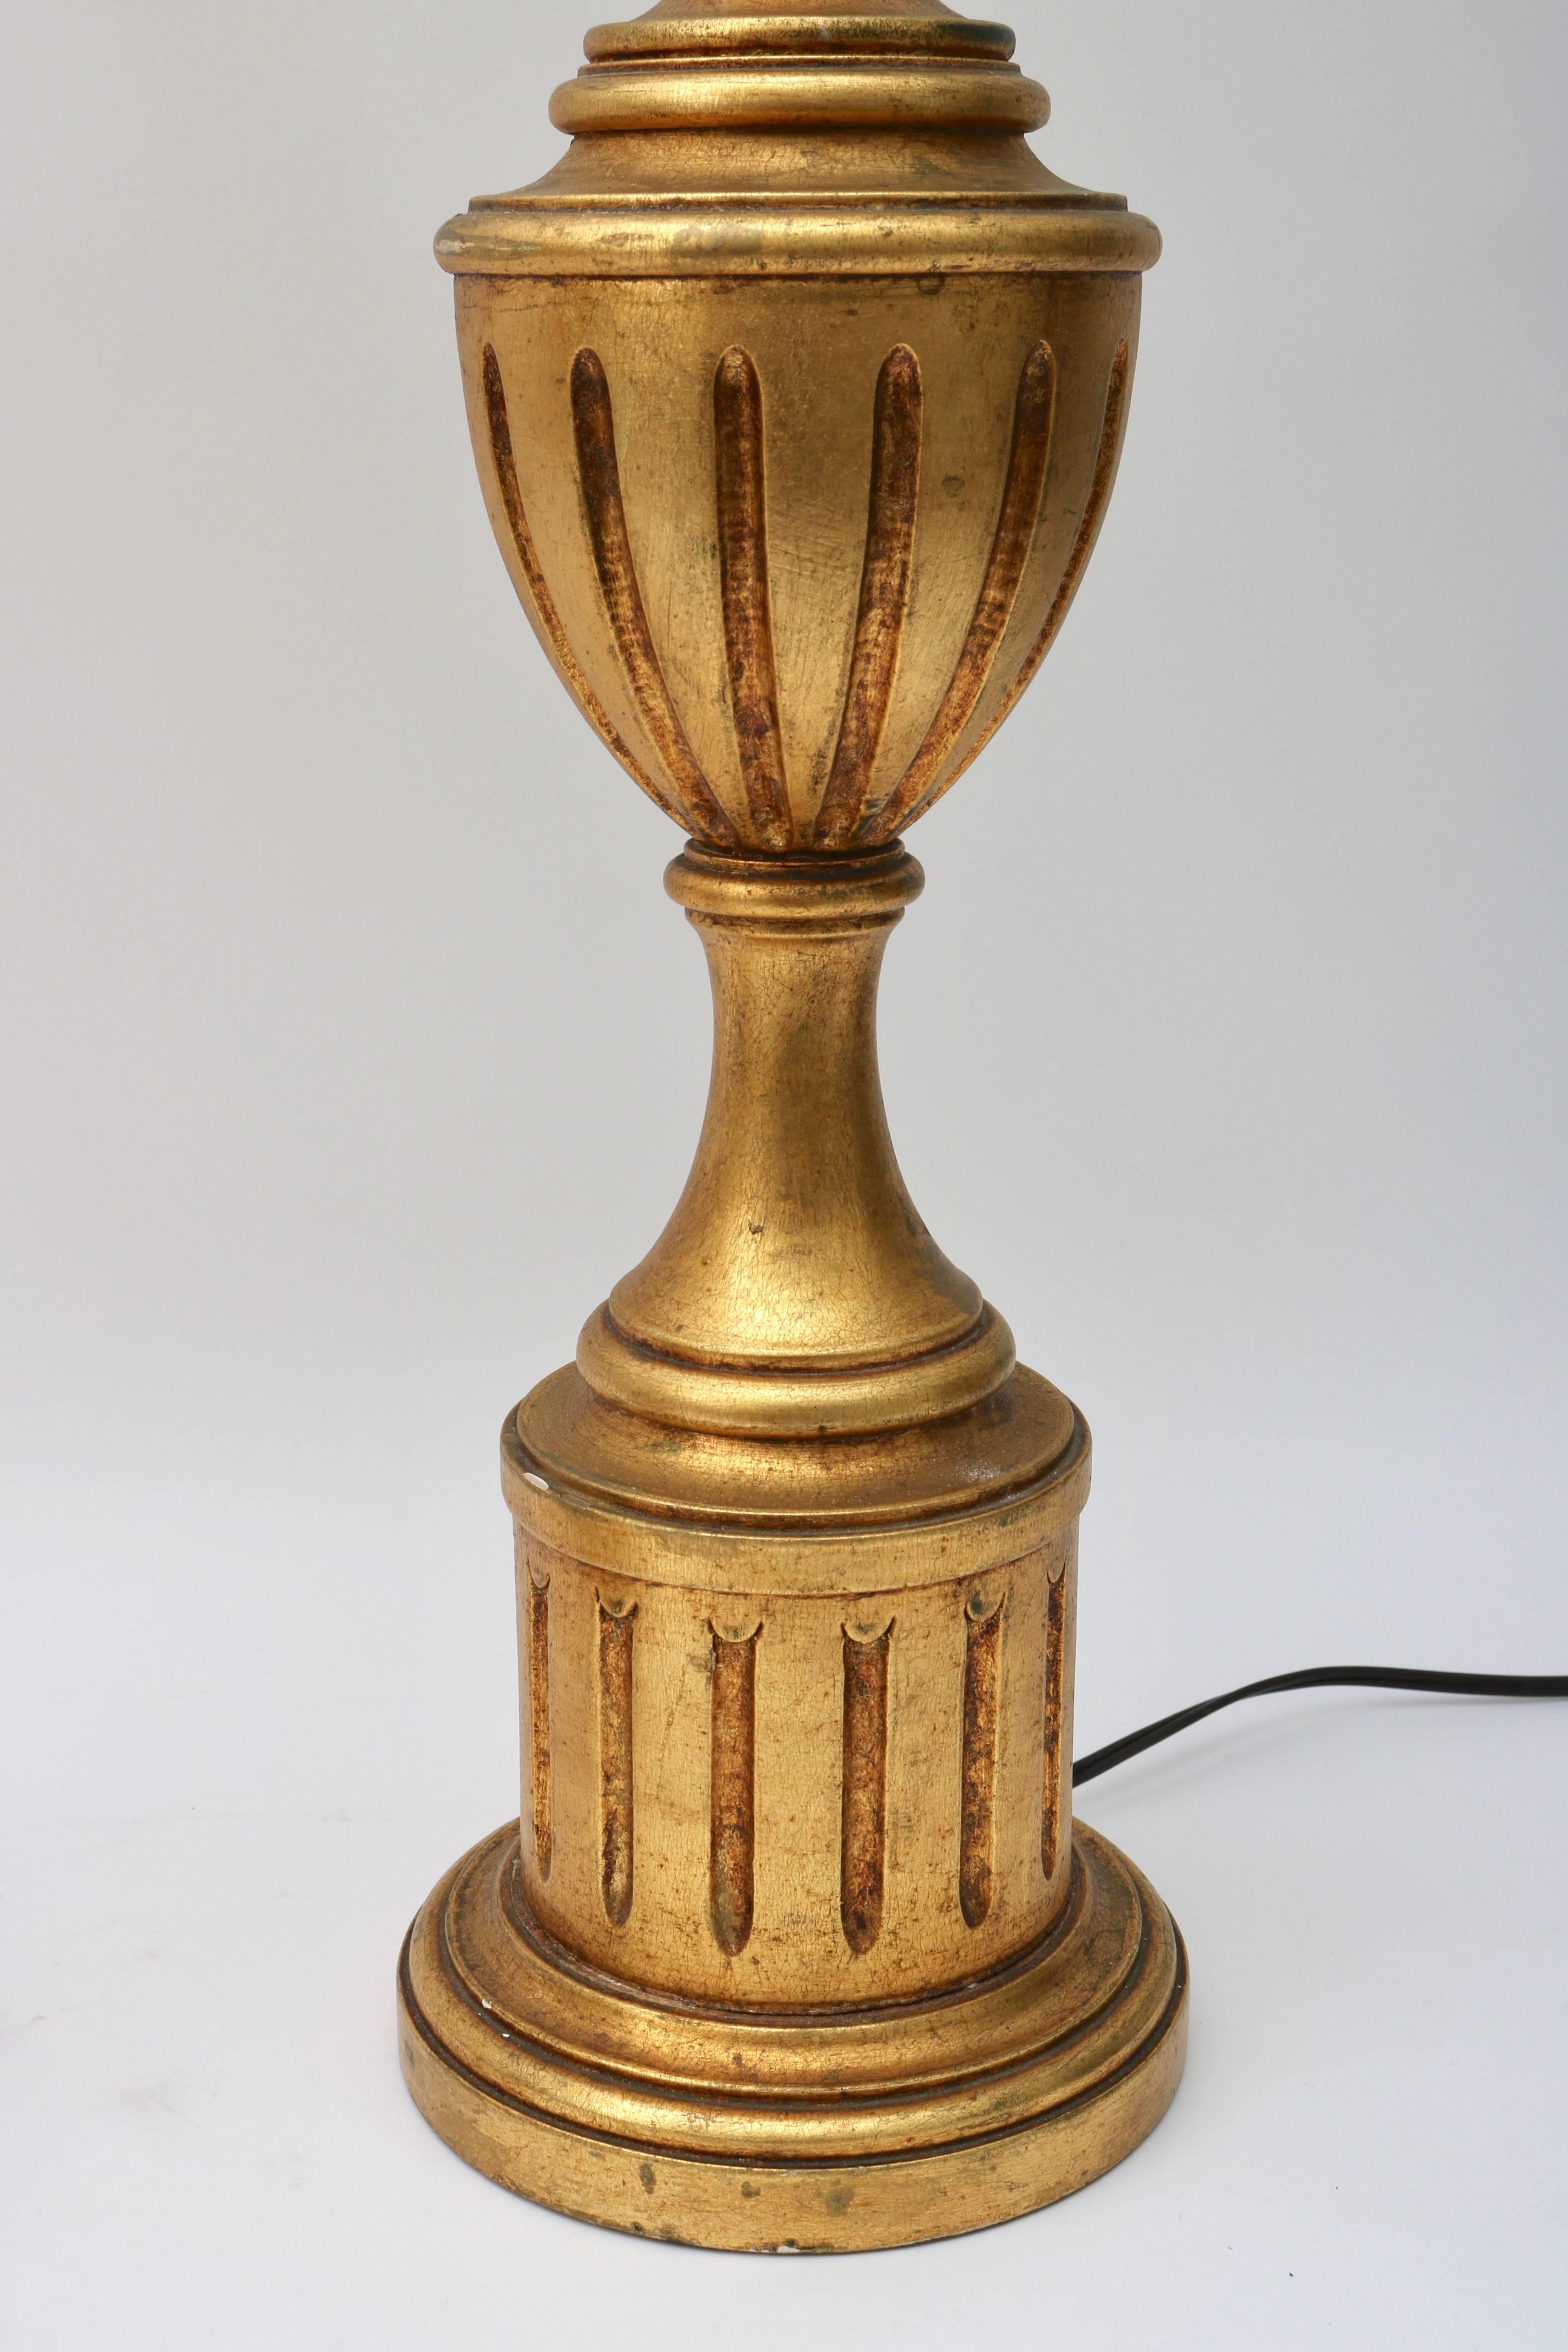 American Pair of Louis XVI Style Urn-Form Table Lamps in a Bright, Antique Gold Finish